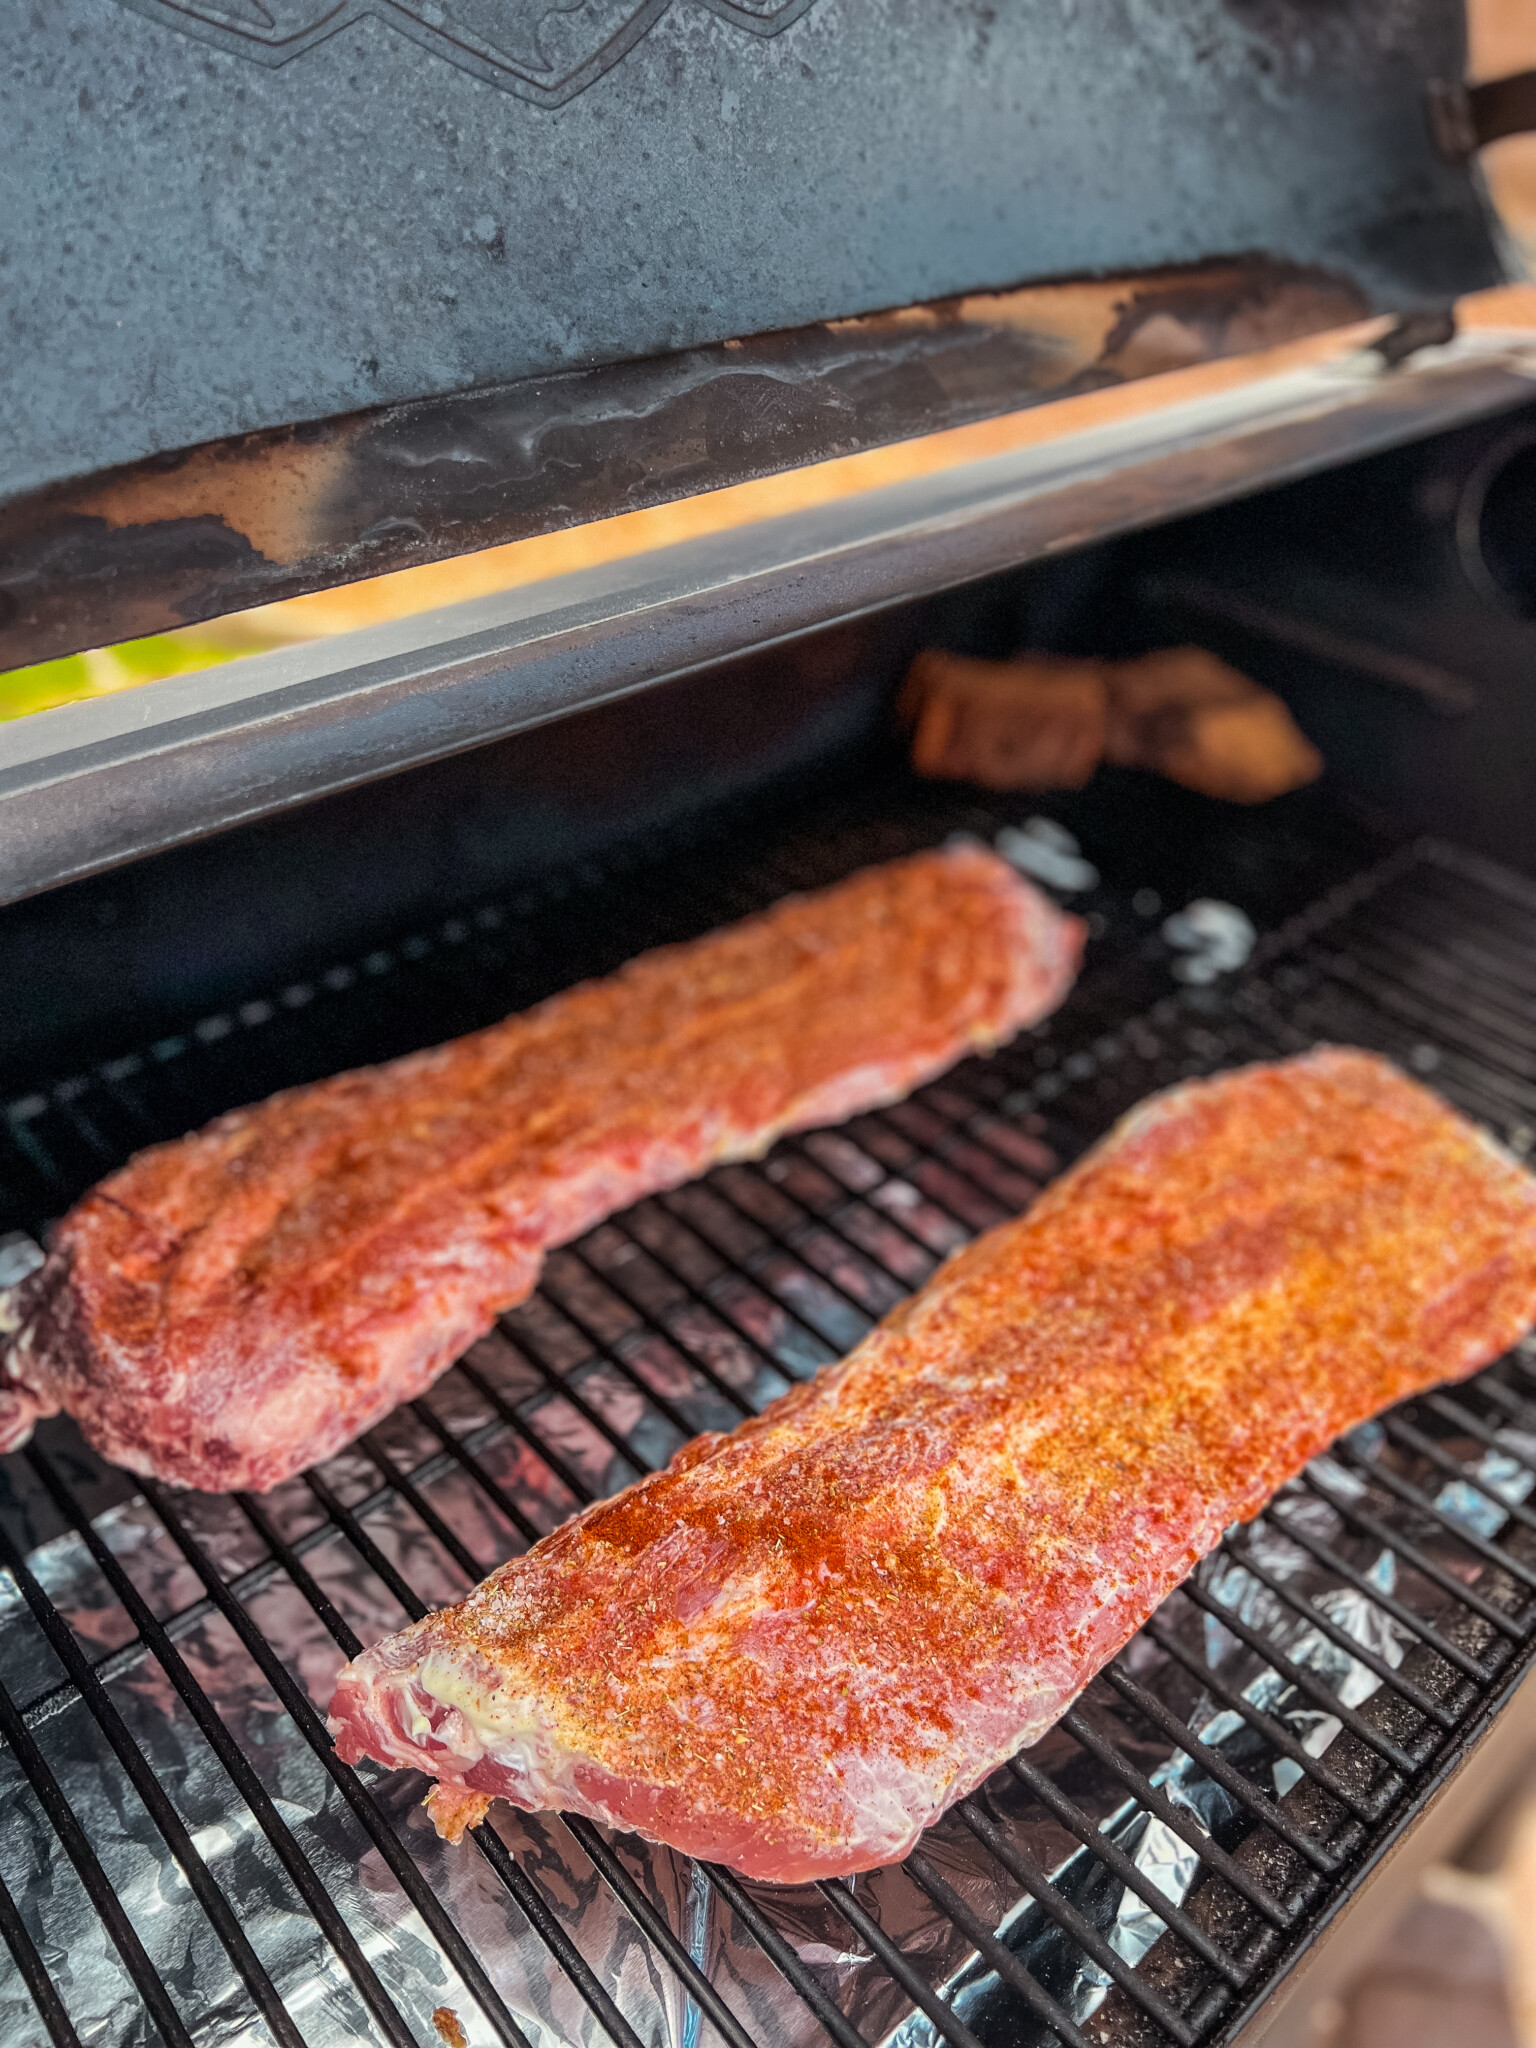 Raw baby back ribs rubbed with spices on grill grates.